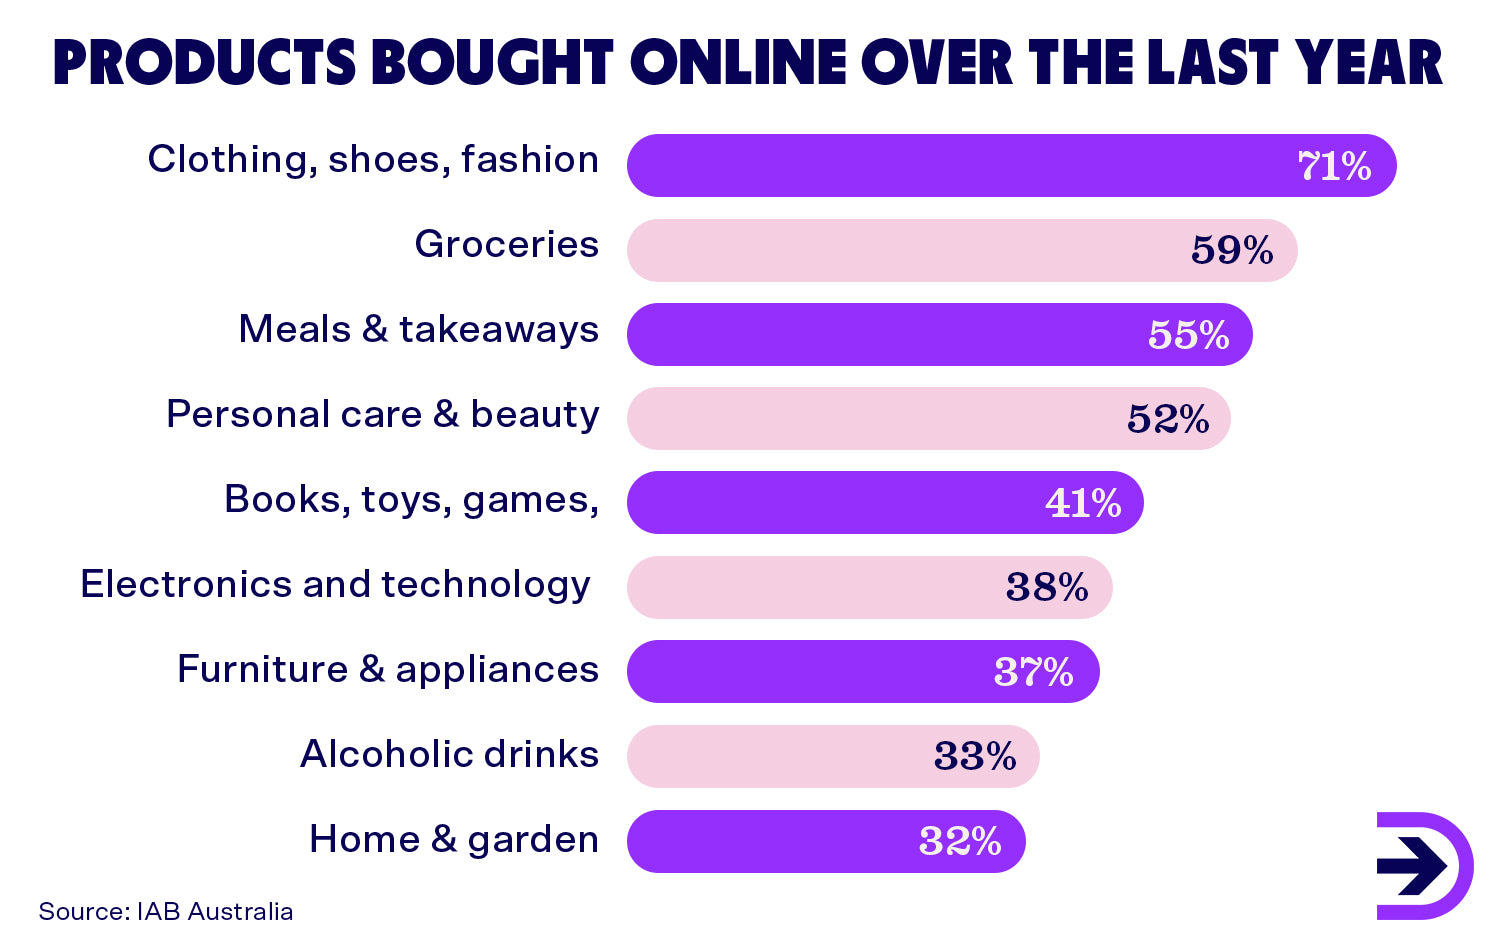 Clothing, shoes and fashion remains the top niche, accounting for 71% of all online purchases, followed by groceries at 59%.